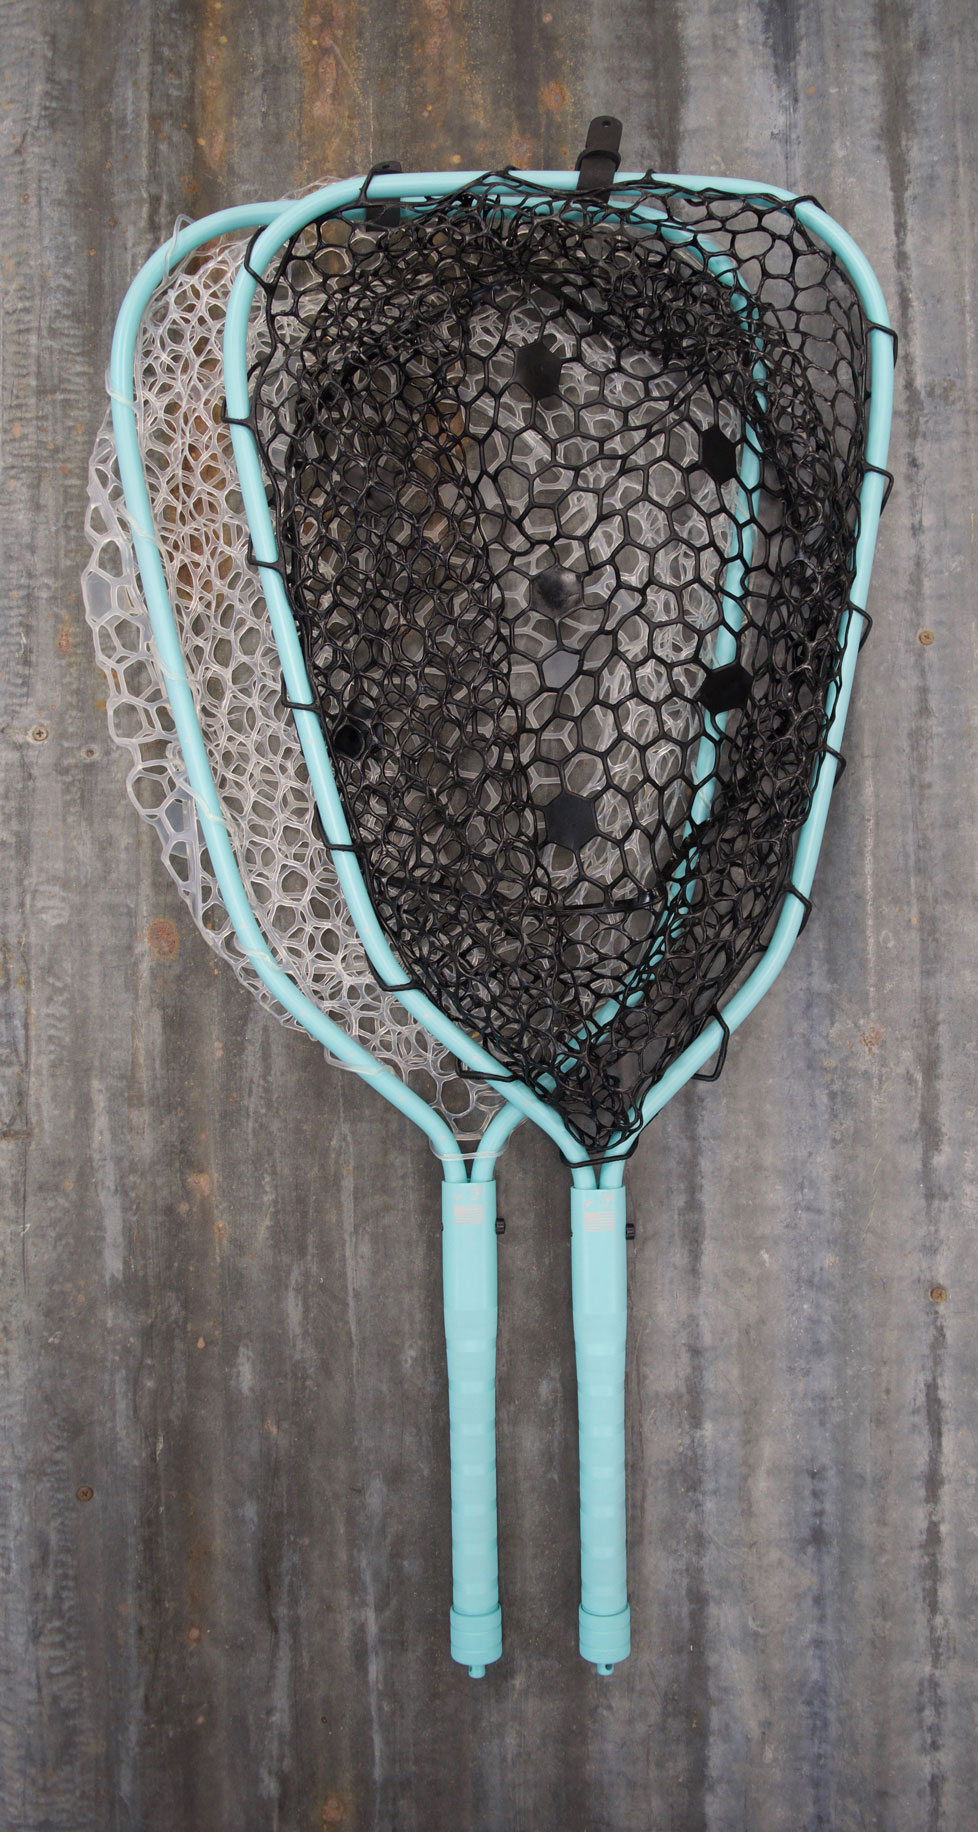  Rising Lunker Net 24 Handle, Black : Sports & Outdoors